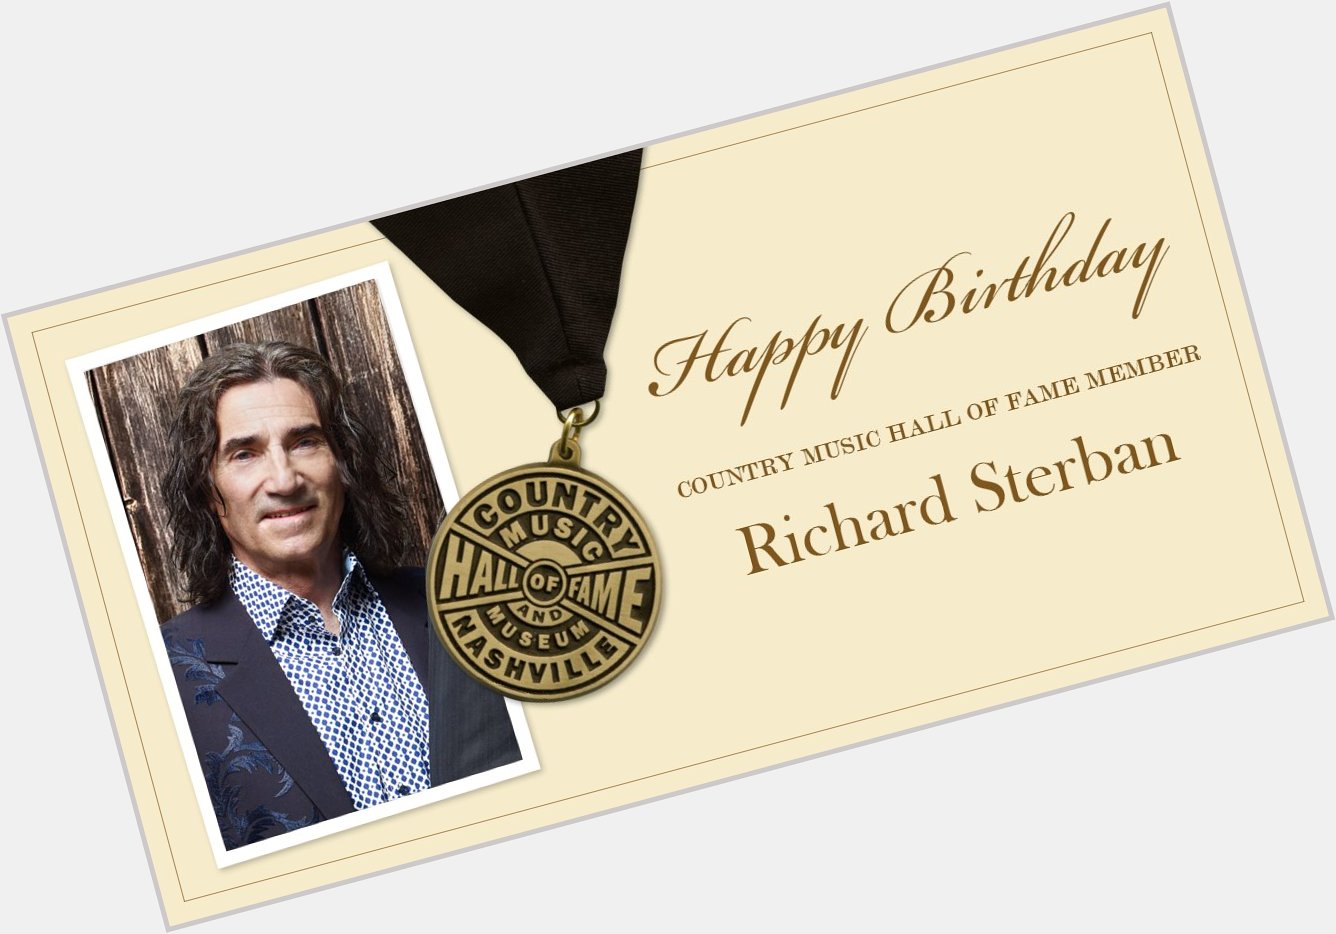 Join us in wishing CMHOF member Richard Sterban, bass singer of the a very happy birthday! 